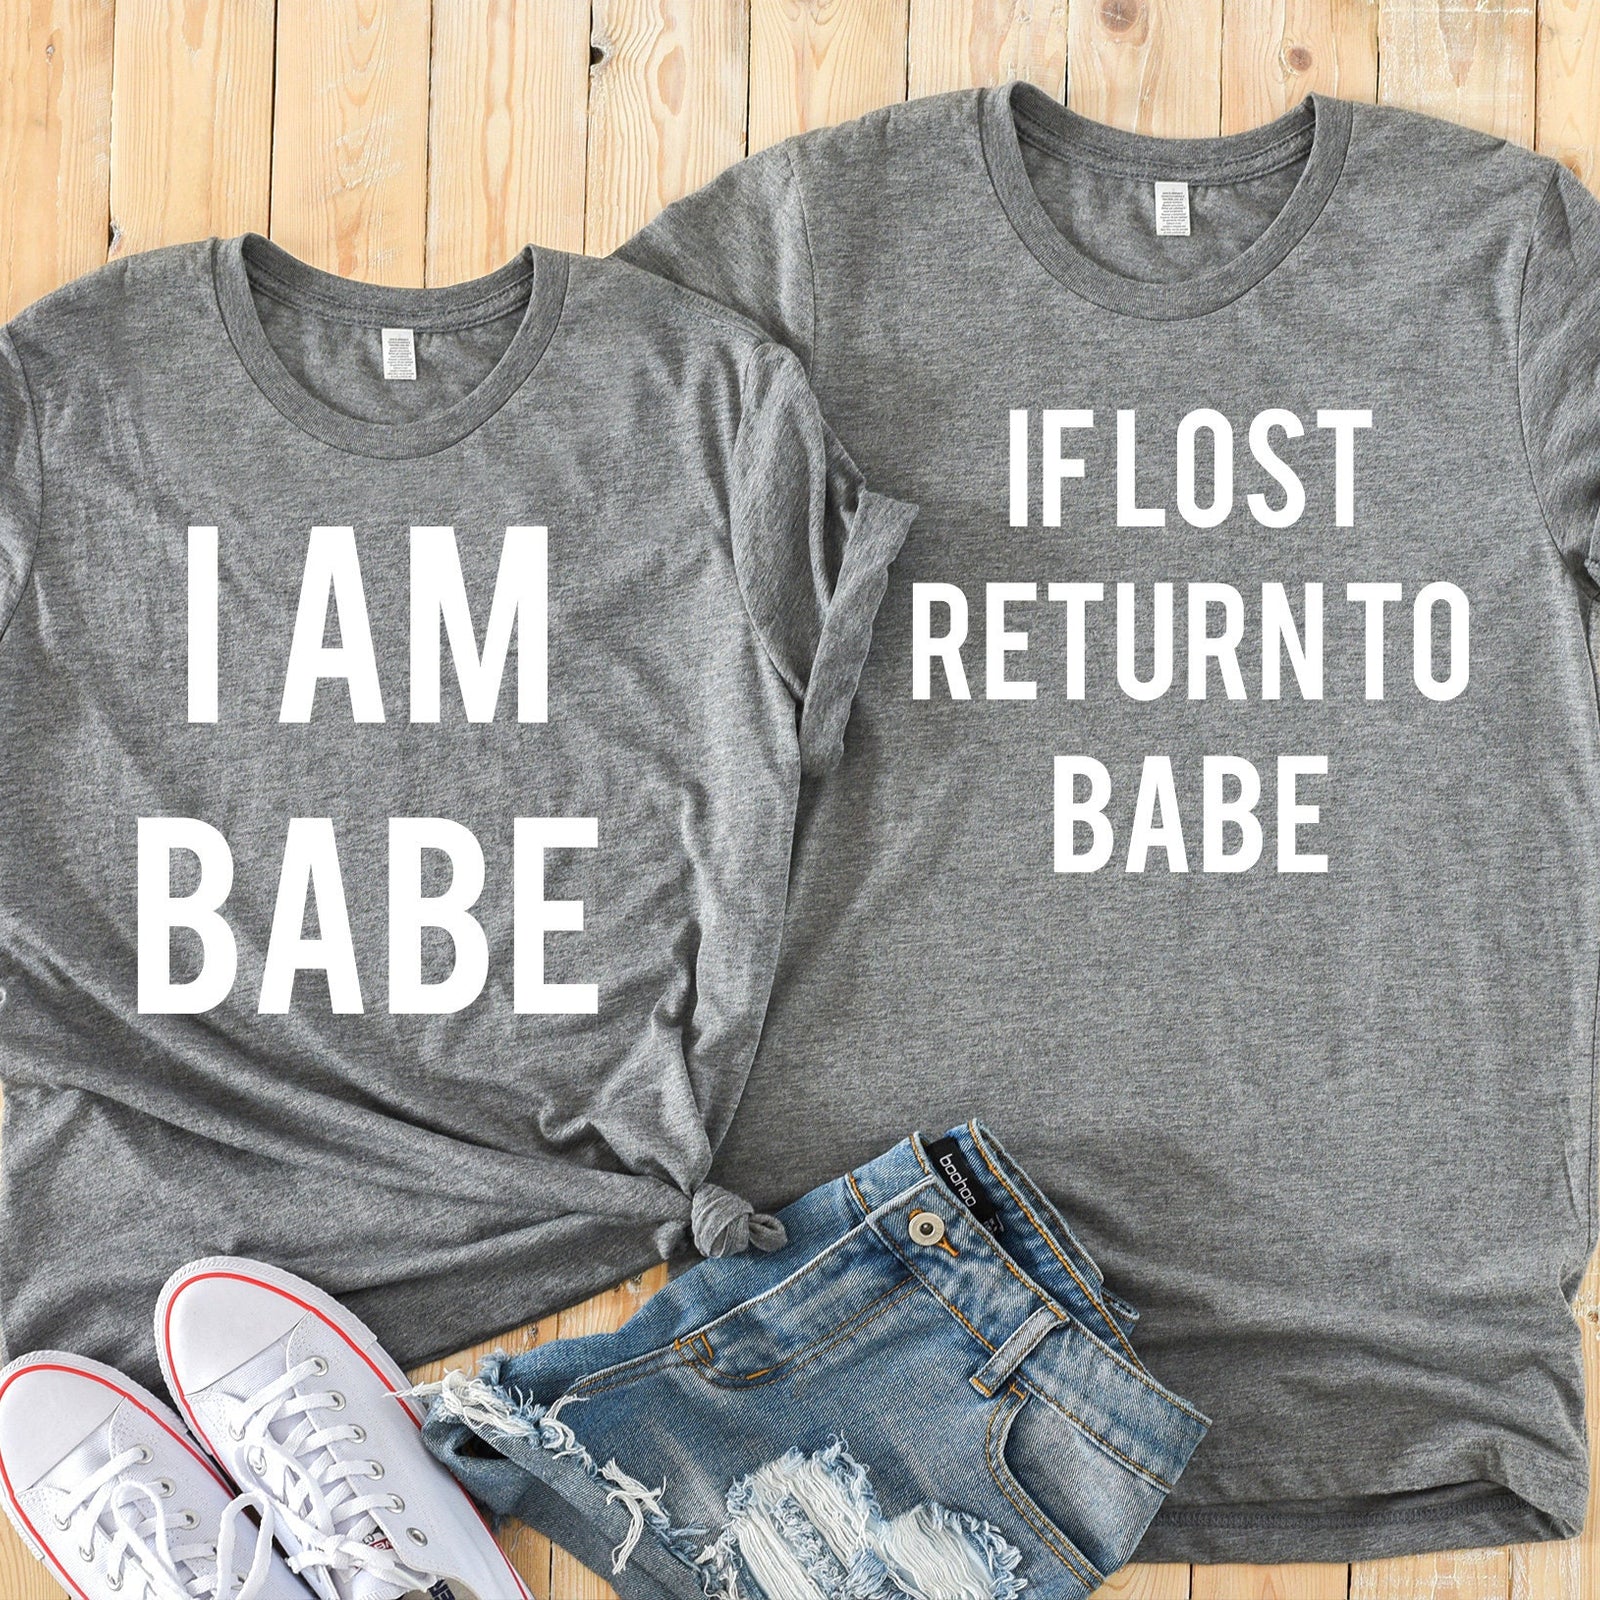 If Lost Return to Babe - I am Babe T Shirts - Couples Matching Shirts - Cute Couples Shirts - Valentines T Shirt Set